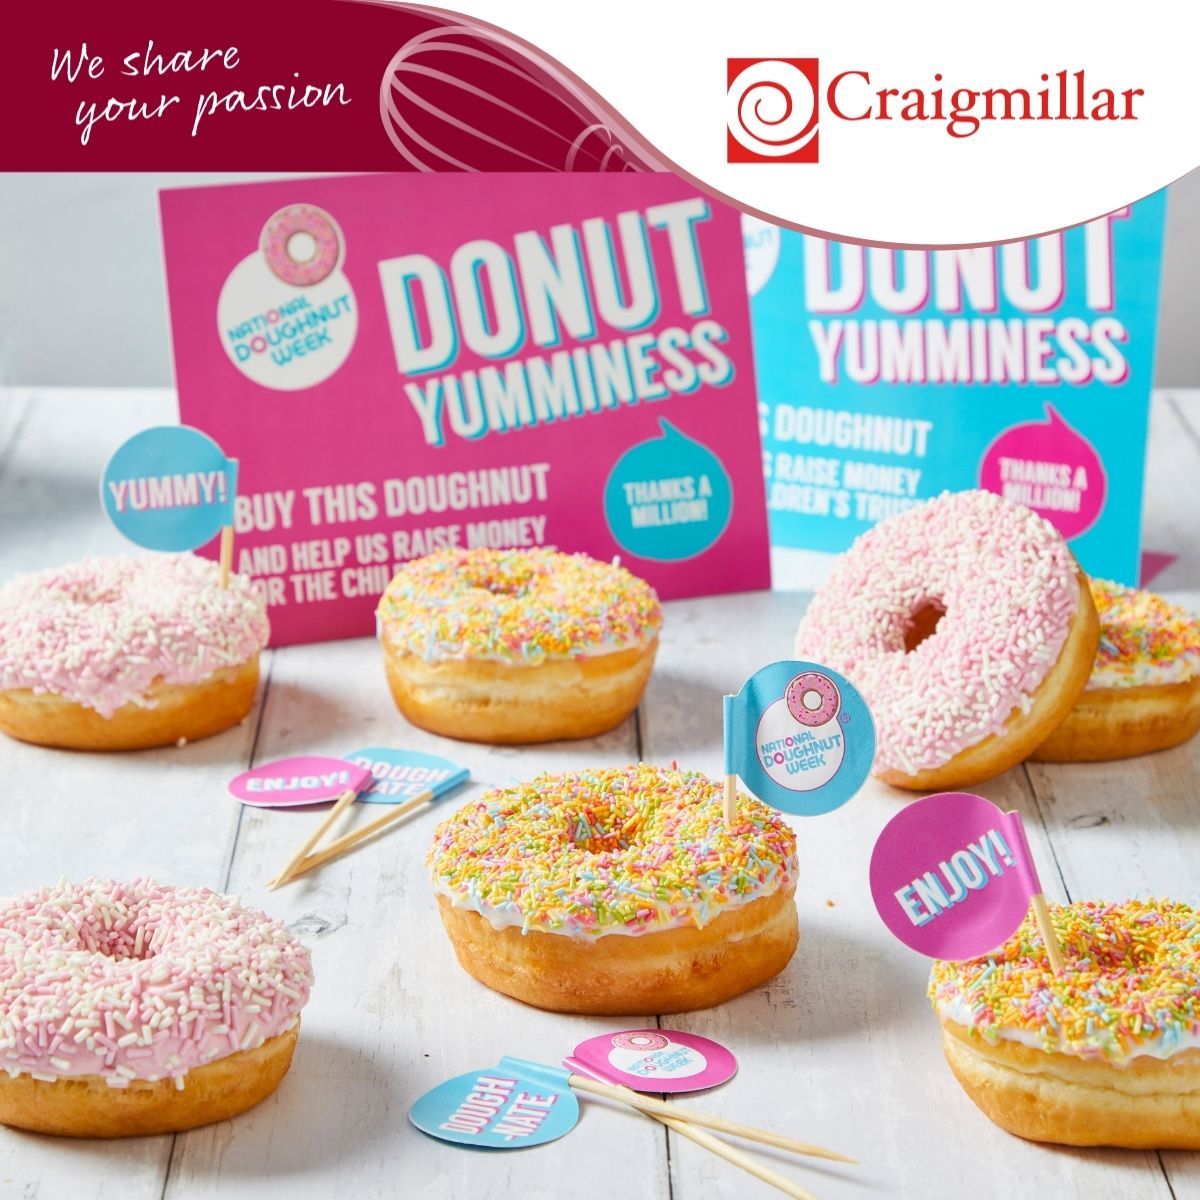 Image for £5 Off CraigMillar's Doughnut Concentrate